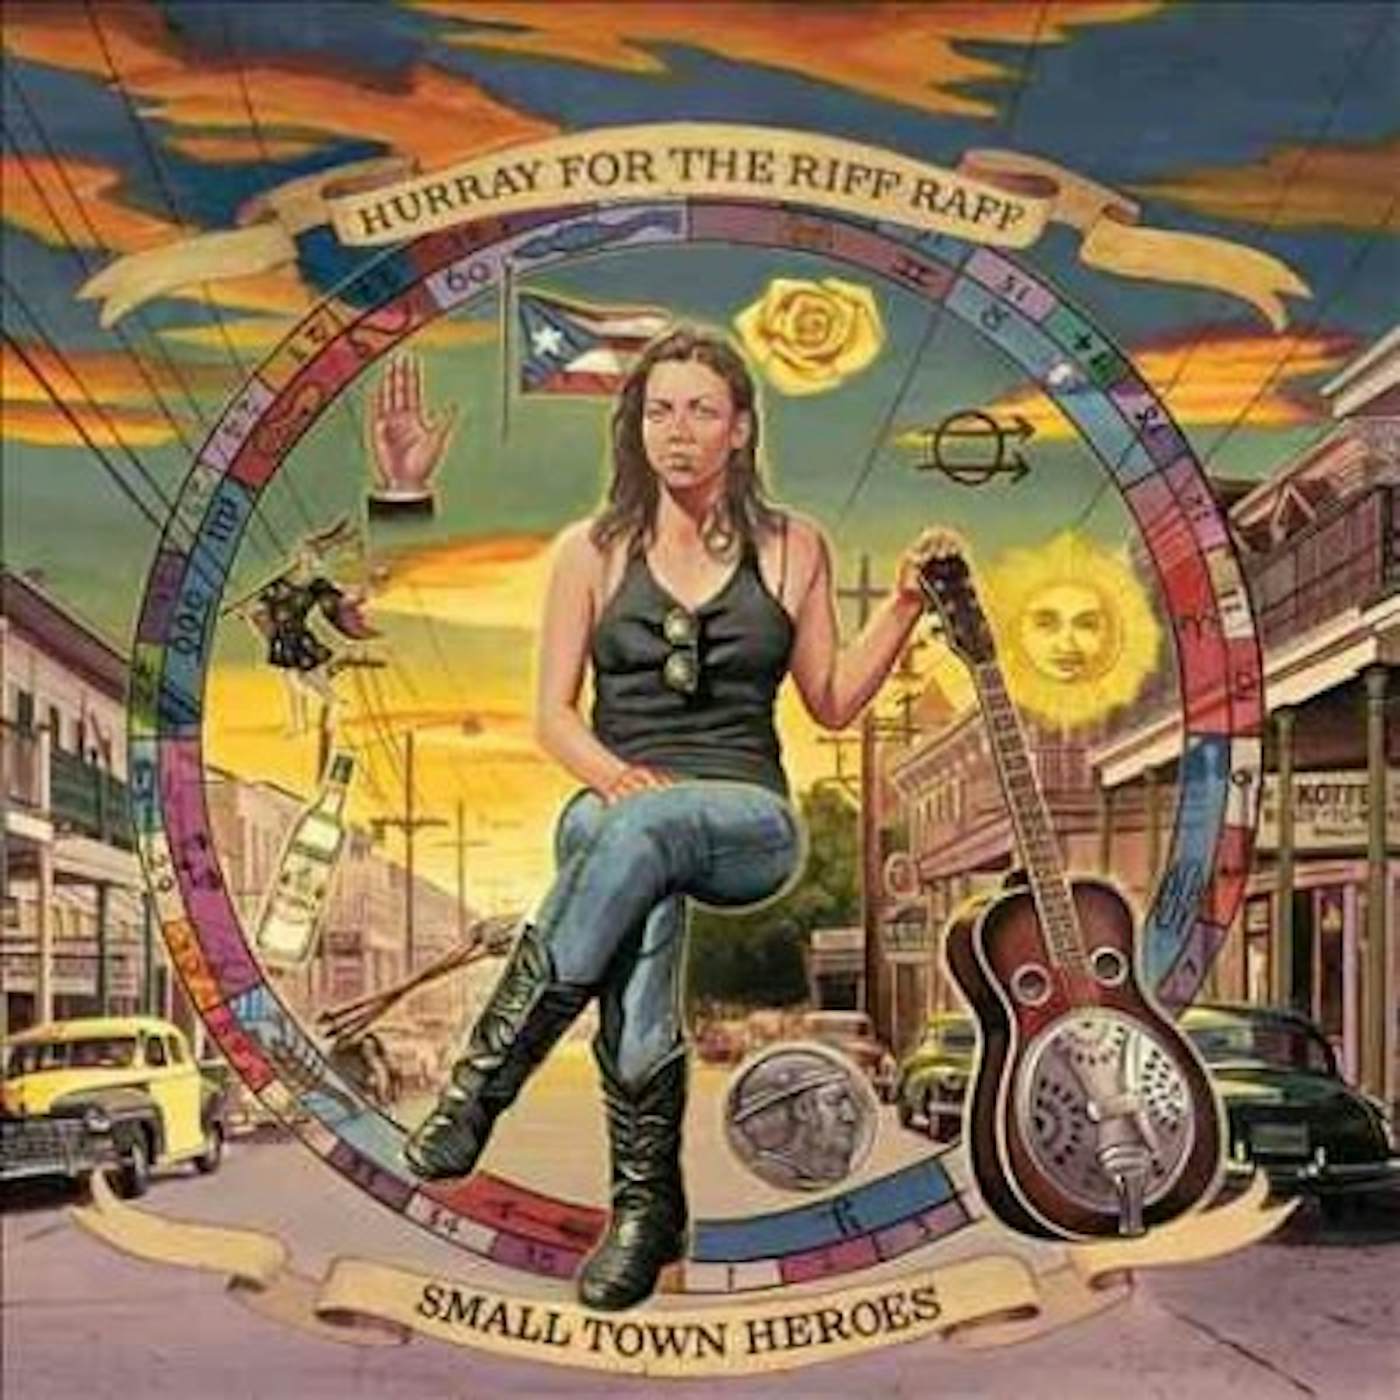 Hurray For The Riff Raff Small Town Heroes Vinyl Record